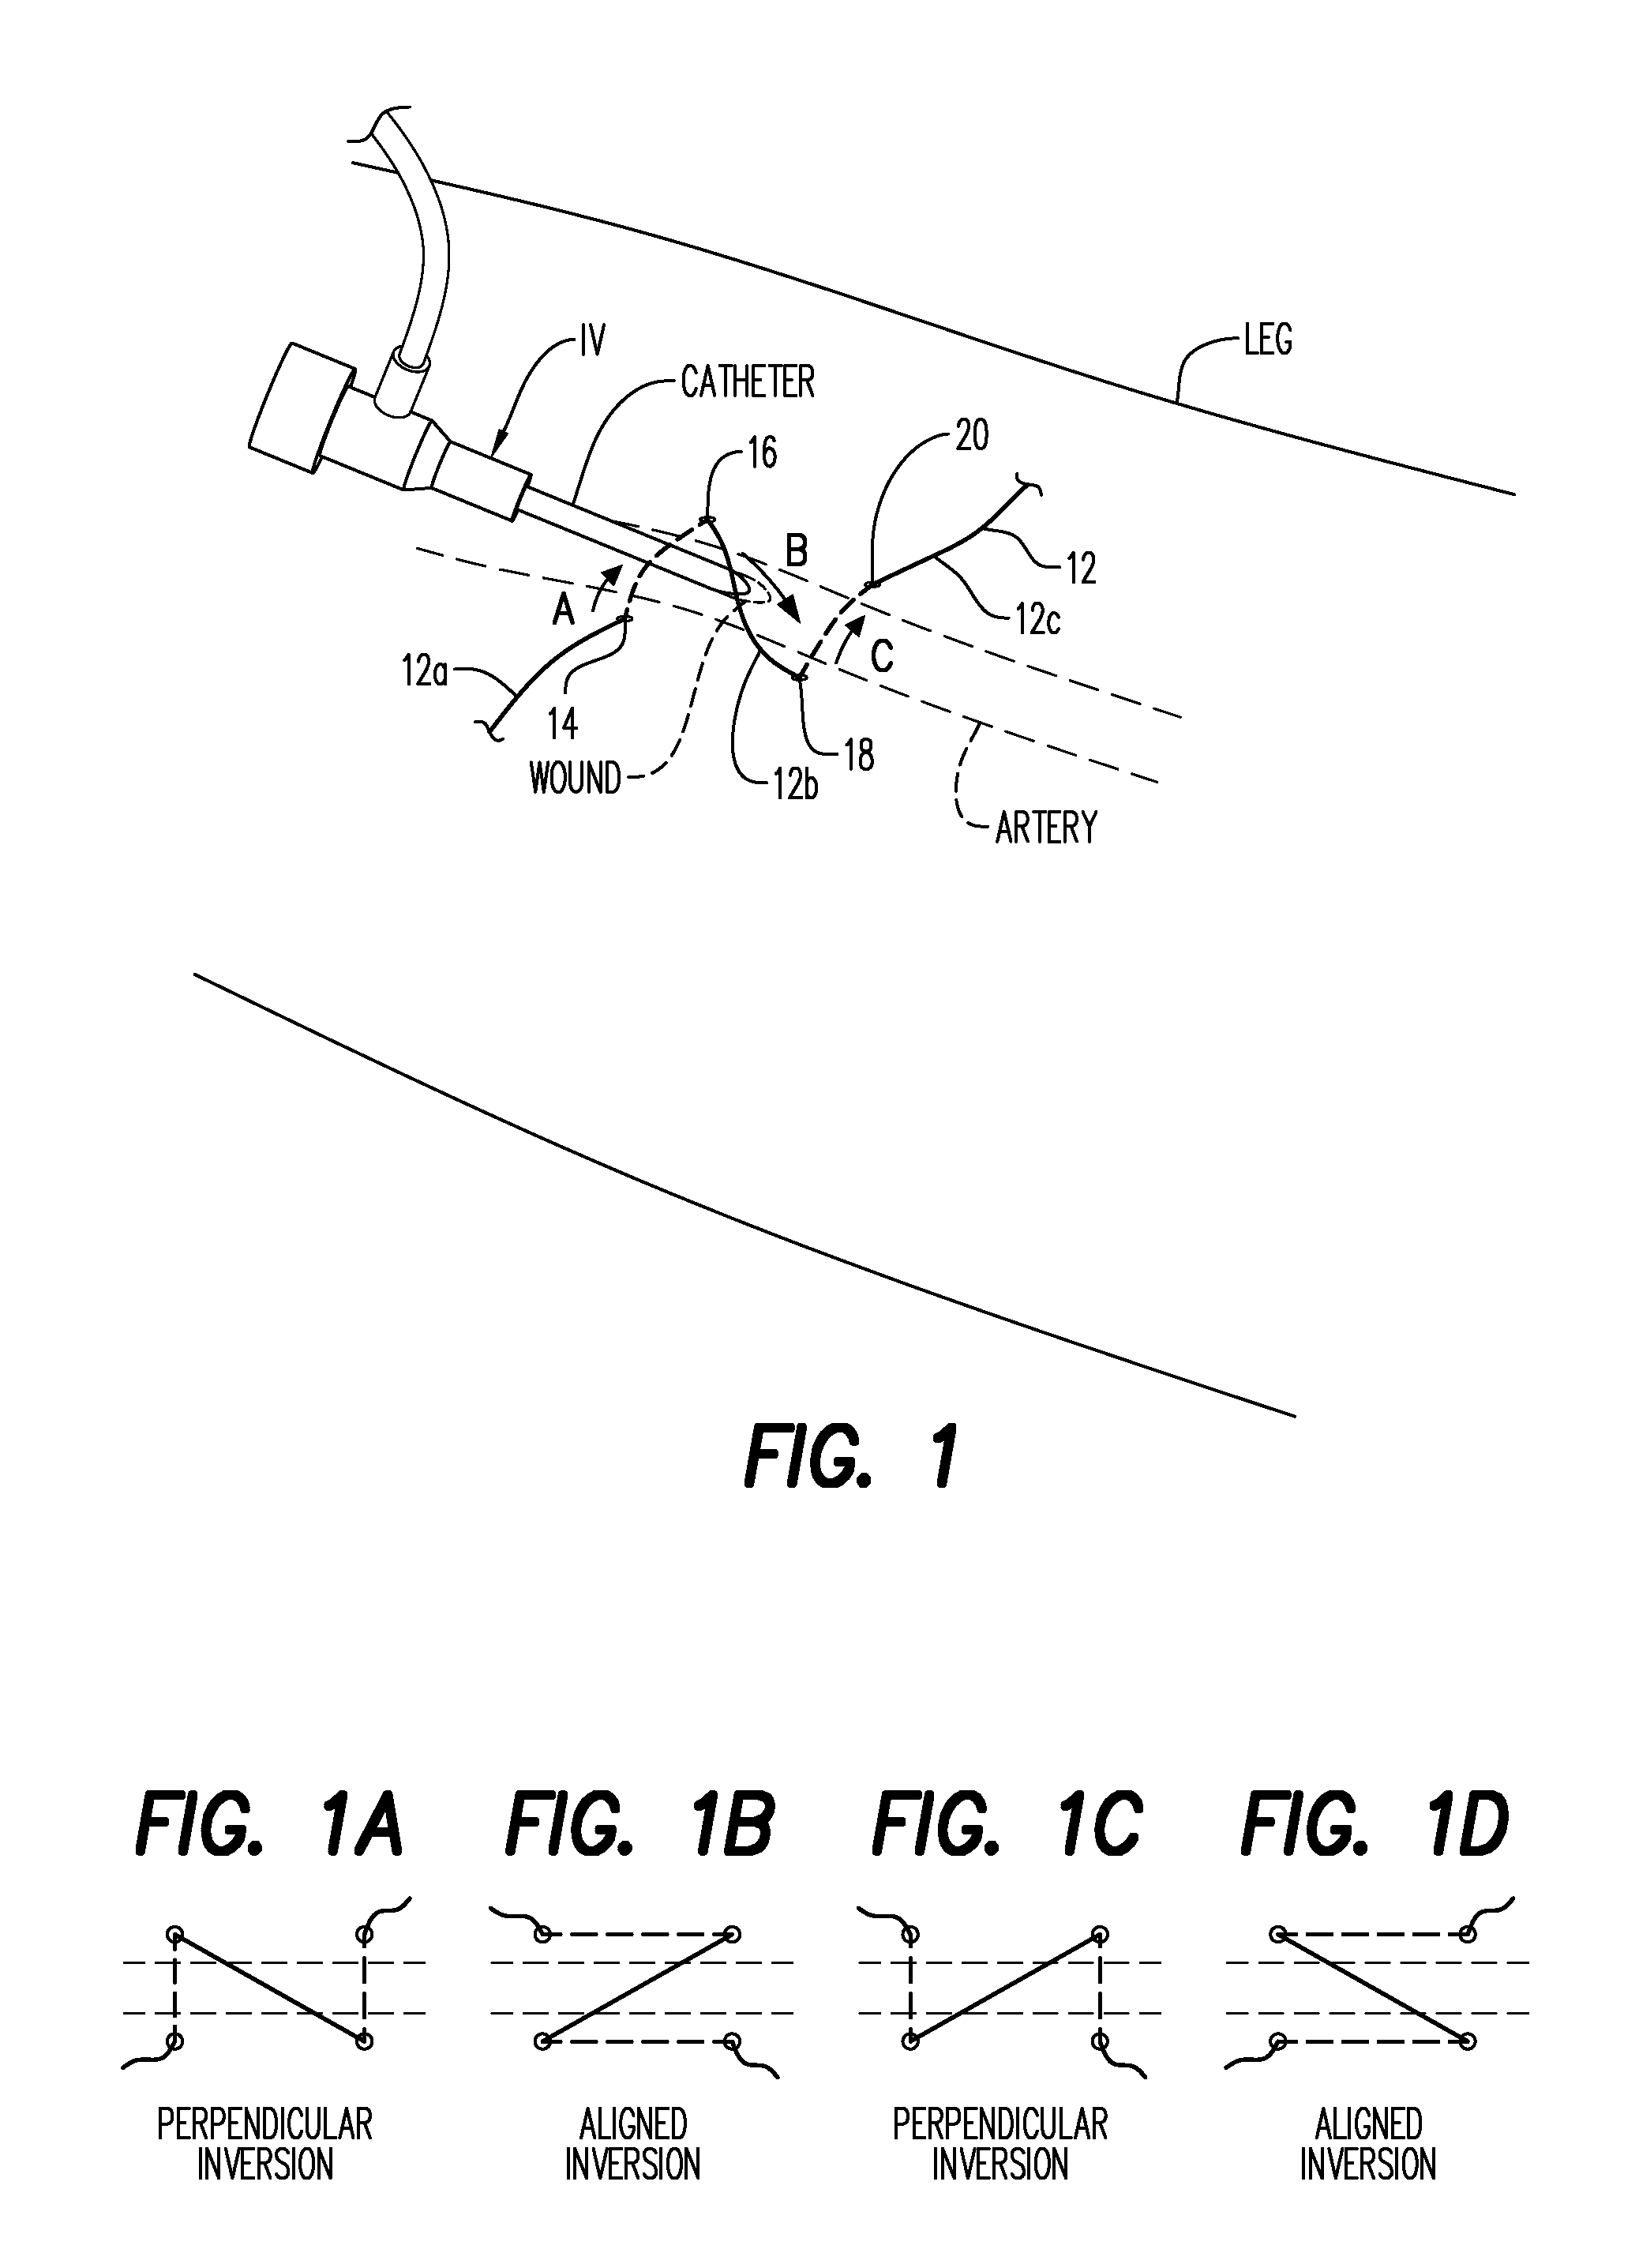 Vascular Access Wound Sealing System and Method